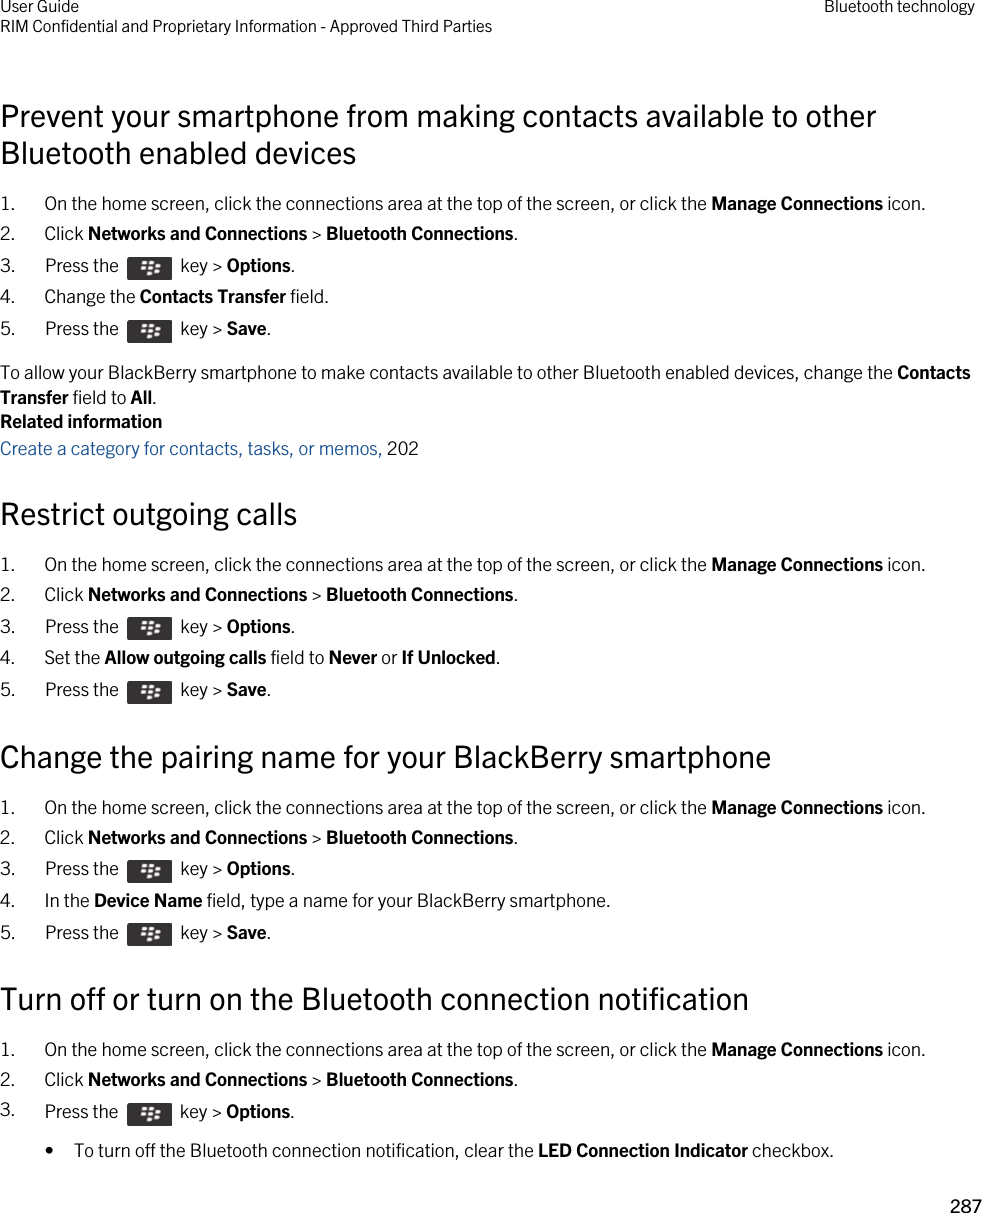 Prevent your smartphone from making contacts available to other Bluetooth enabled devices1. On the home screen, click the connections area at the top of the screen, or click the Manage Connections icon.2. Click Networks and Connections &gt; Bluetooth Connections.3.  Press the    key &gt; Options. 4. Change the Contacts Transfer field.5.  Press the    key &gt; Save. To allow your BlackBerry smartphone to make contacts available to other Bluetooth enabled devices, change the Contacts Transfer field to All.Related informationCreate a category for contacts, tasks, or memos, 202 Restrict outgoing calls1. On the home screen, click the connections area at the top of the screen, or click the Manage Connections icon.2. Click Networks and Connections &gt; Bluetooth Connections.3.  Press the    key &gt; Options. 4. Set the Allow outgoing calls field to Never or If Unlocked.5.  Press the    key &gt; Save. Change the pairing name for your BlackBerry smartphone1. On the home screen, click the connections area at the top of the screen, or click the Manage Connections icon.2. Click Networks and Connections &gt; Bluetooth Connections.3.  Press the    key &gt; Options. 4. In the Device Name field, type a name for your BlackBerry smartphone.5.  Press the    key &gt; Save. Turn off or turn on the Bluetooth connection notification1. On the home screen, click the connections area at the top of the screen, or click the Manage Connections icon.2. Click Networks and Connections &gt; Bluetooth Connections.3. Press the    key &gt; Options. • To turn off the Bluetooth connection notification, clear the LED Connection Indicator checkbox.User GuideRIM Confidential and Proprietary Information - Approved Third Parties Bluetooth technology287 